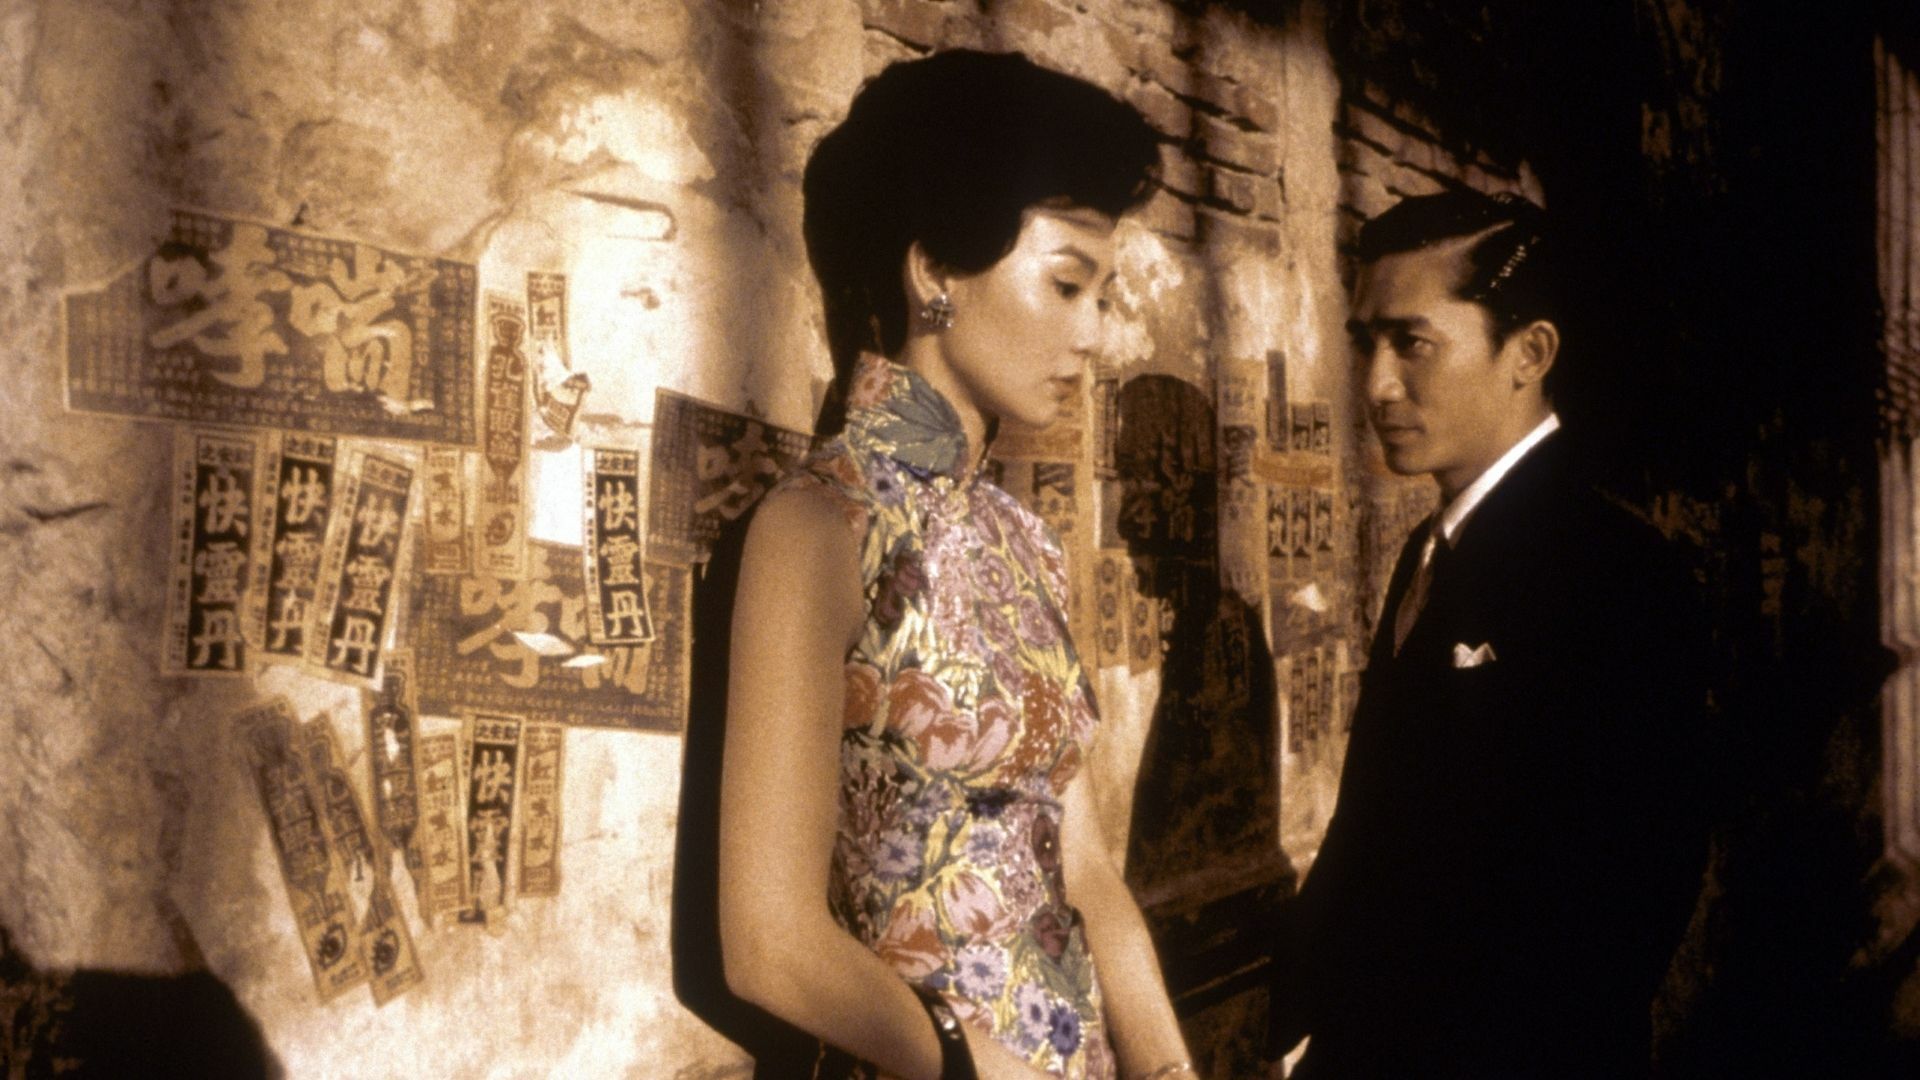 Maggie Cheung and Tony Leung in "In the Mood for Love"